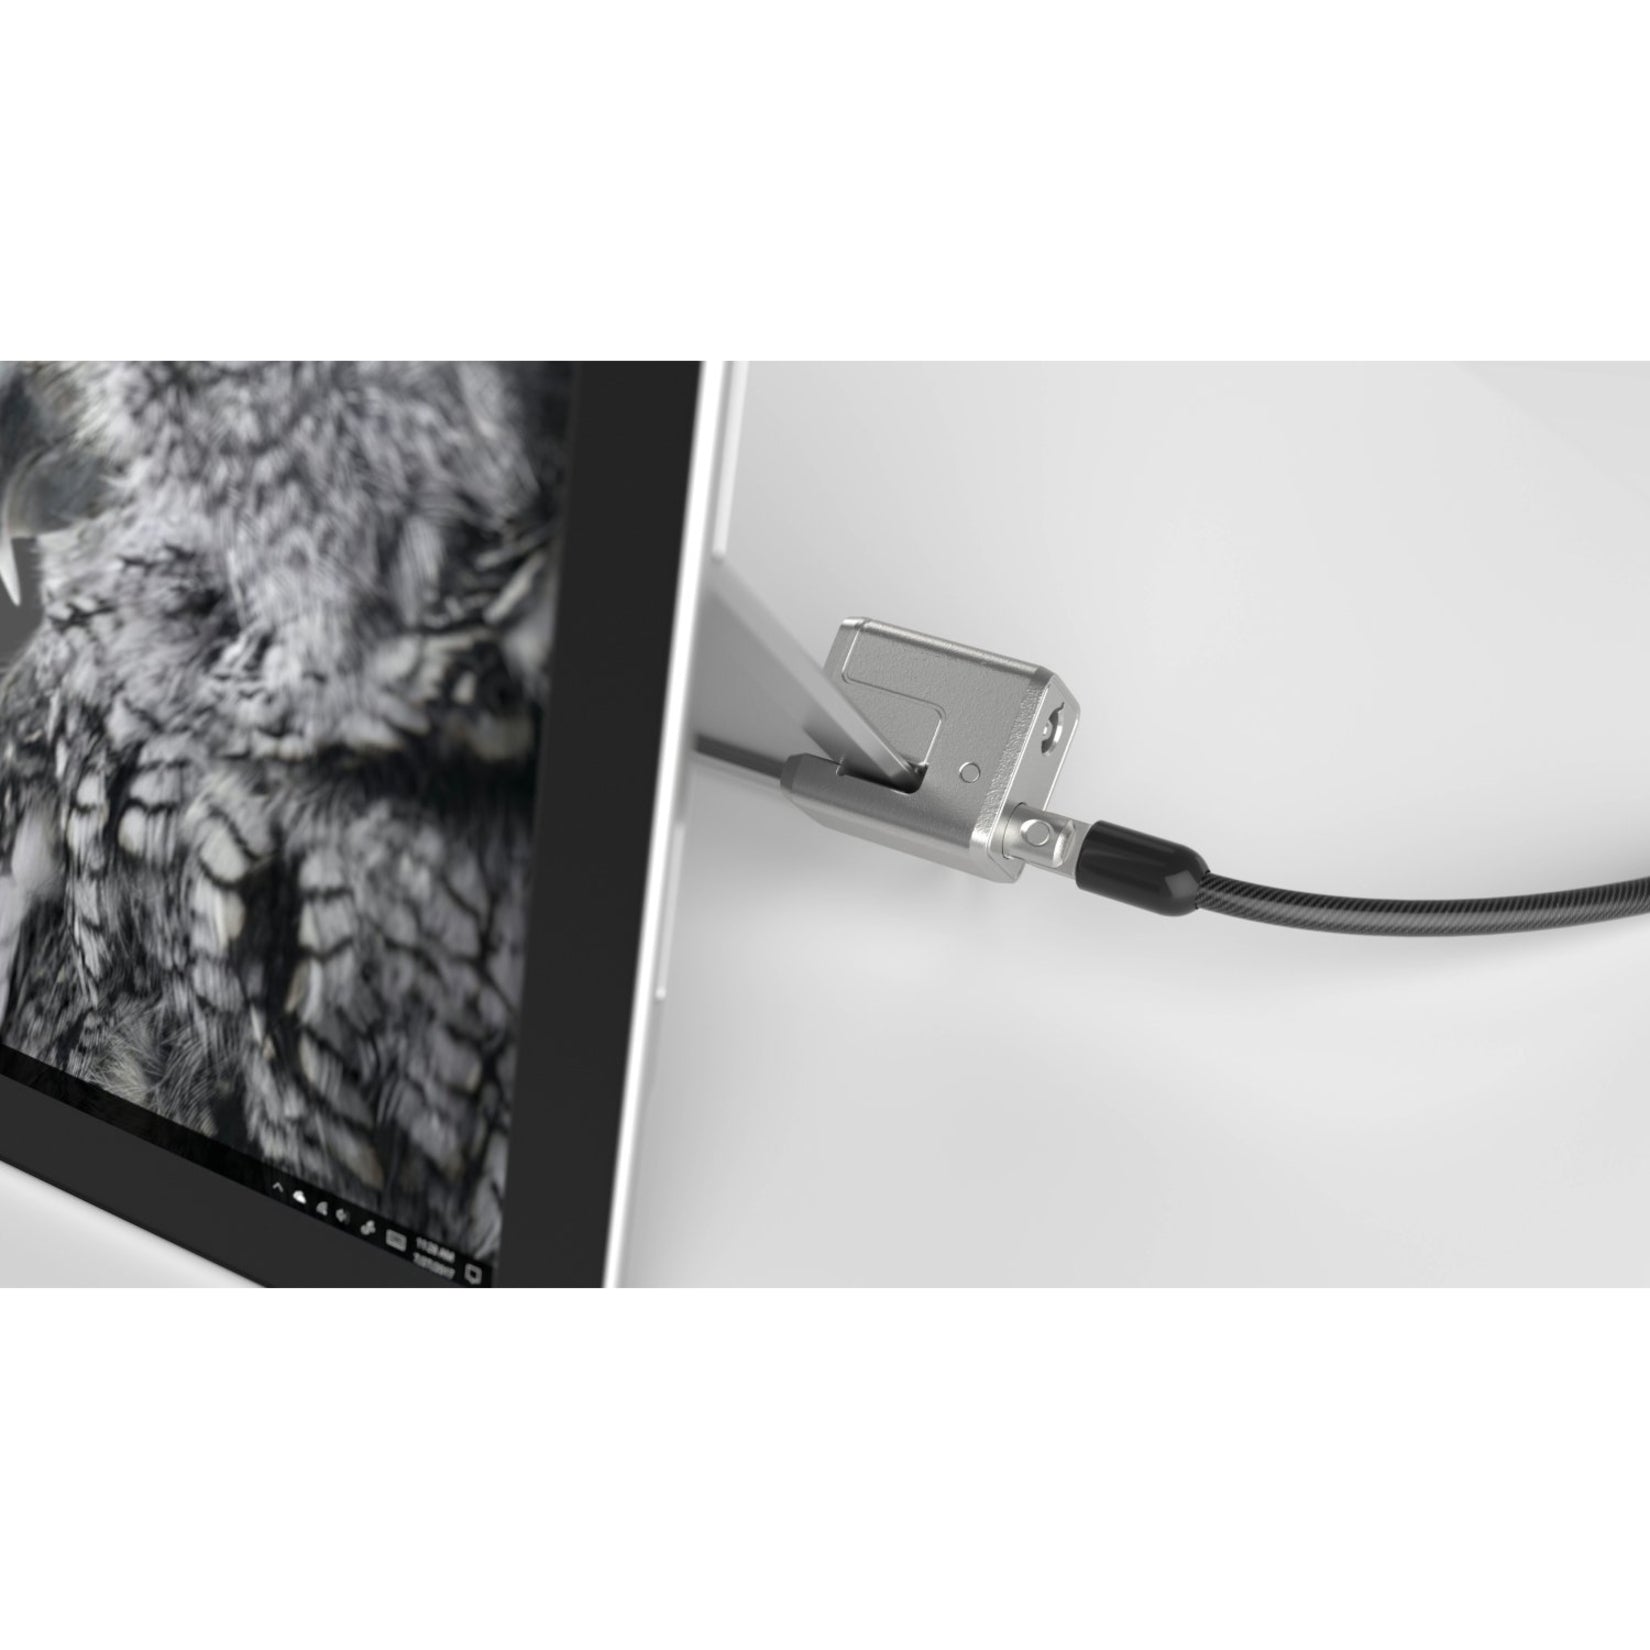 Kensington K64823US Keyed Cable Lock for Surface Pro & Surface Go, Tablet & Notebook Security